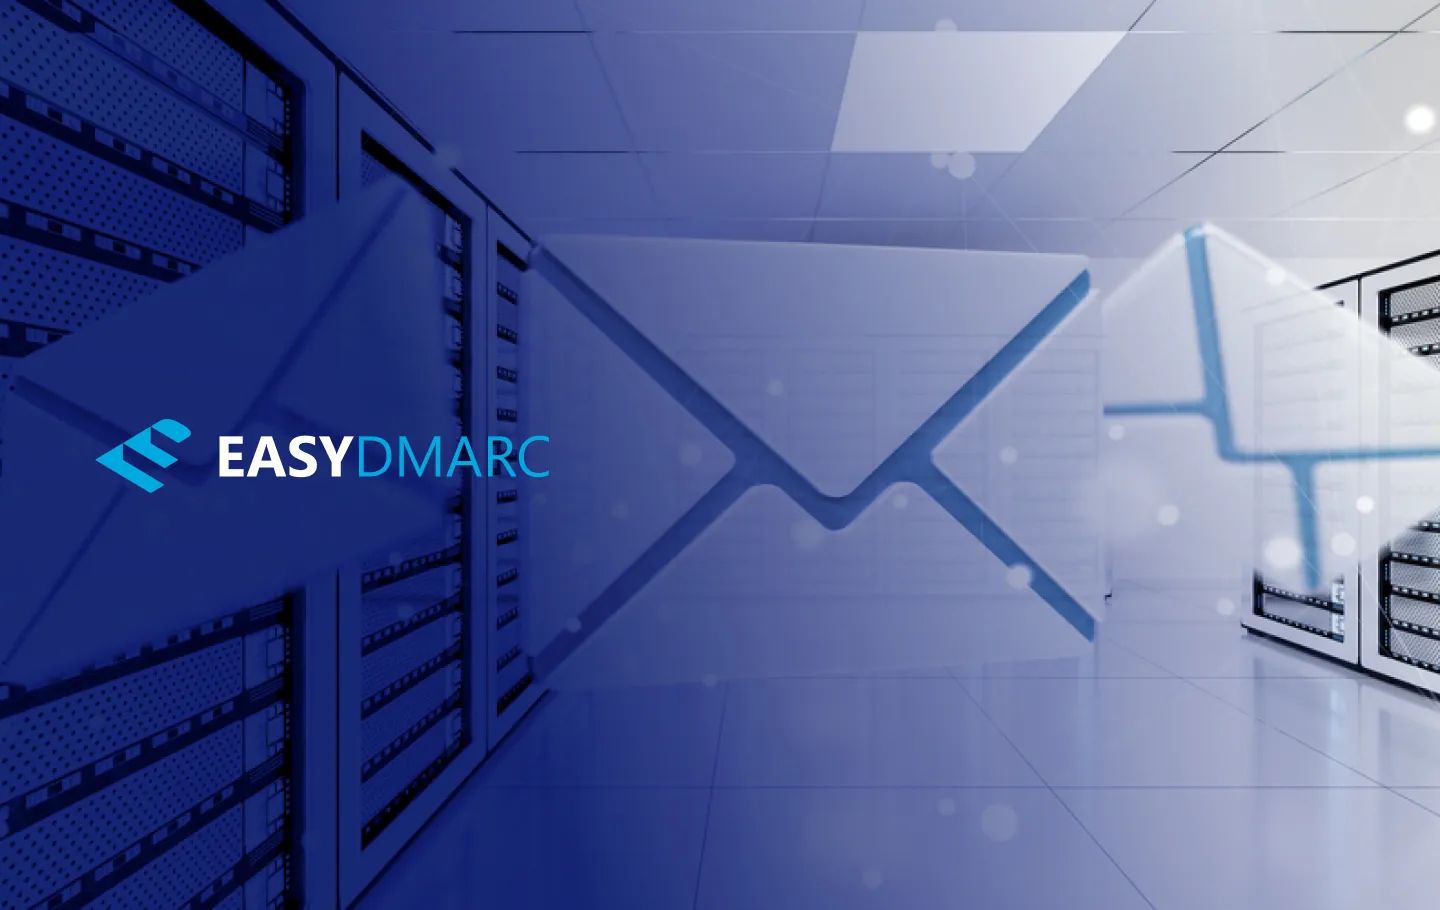 A letter image and the EasyDMARC logo on the left side on a blue background